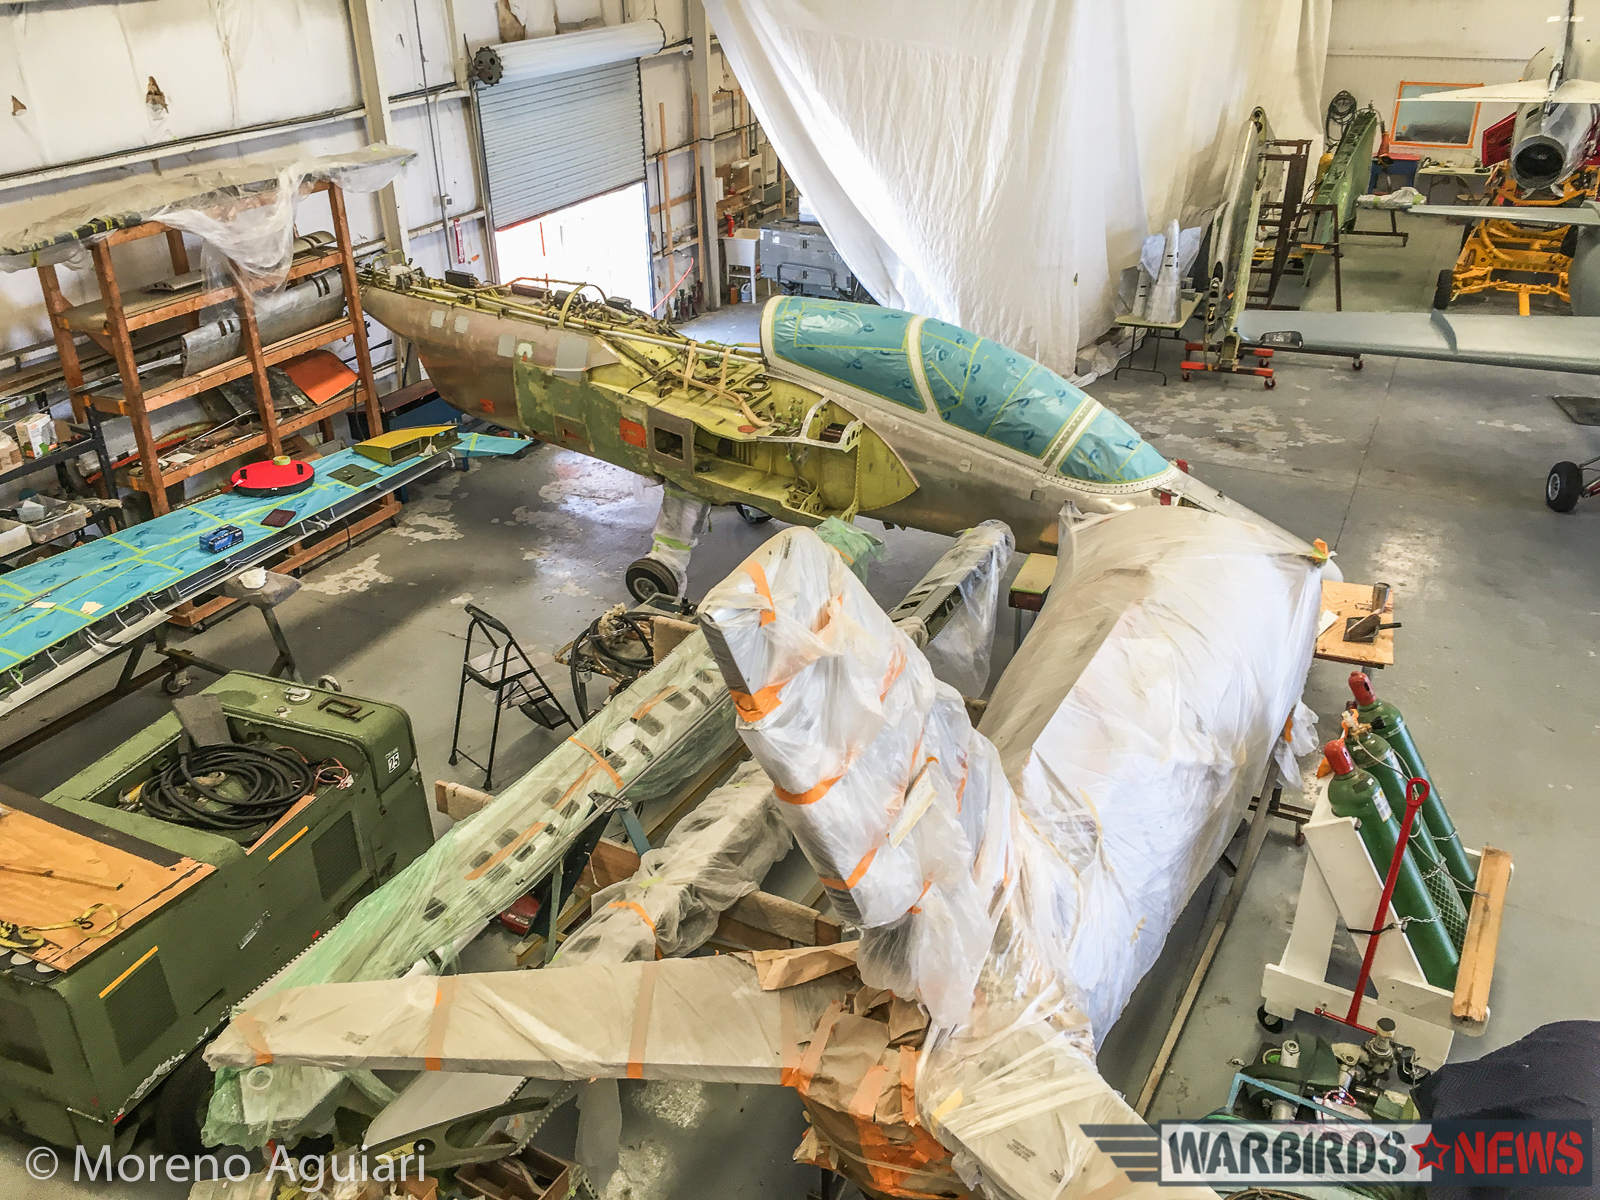 S.211 airframes awaiting rebuild at Classic Fighters of America. (photo by Moreno Aguiari)